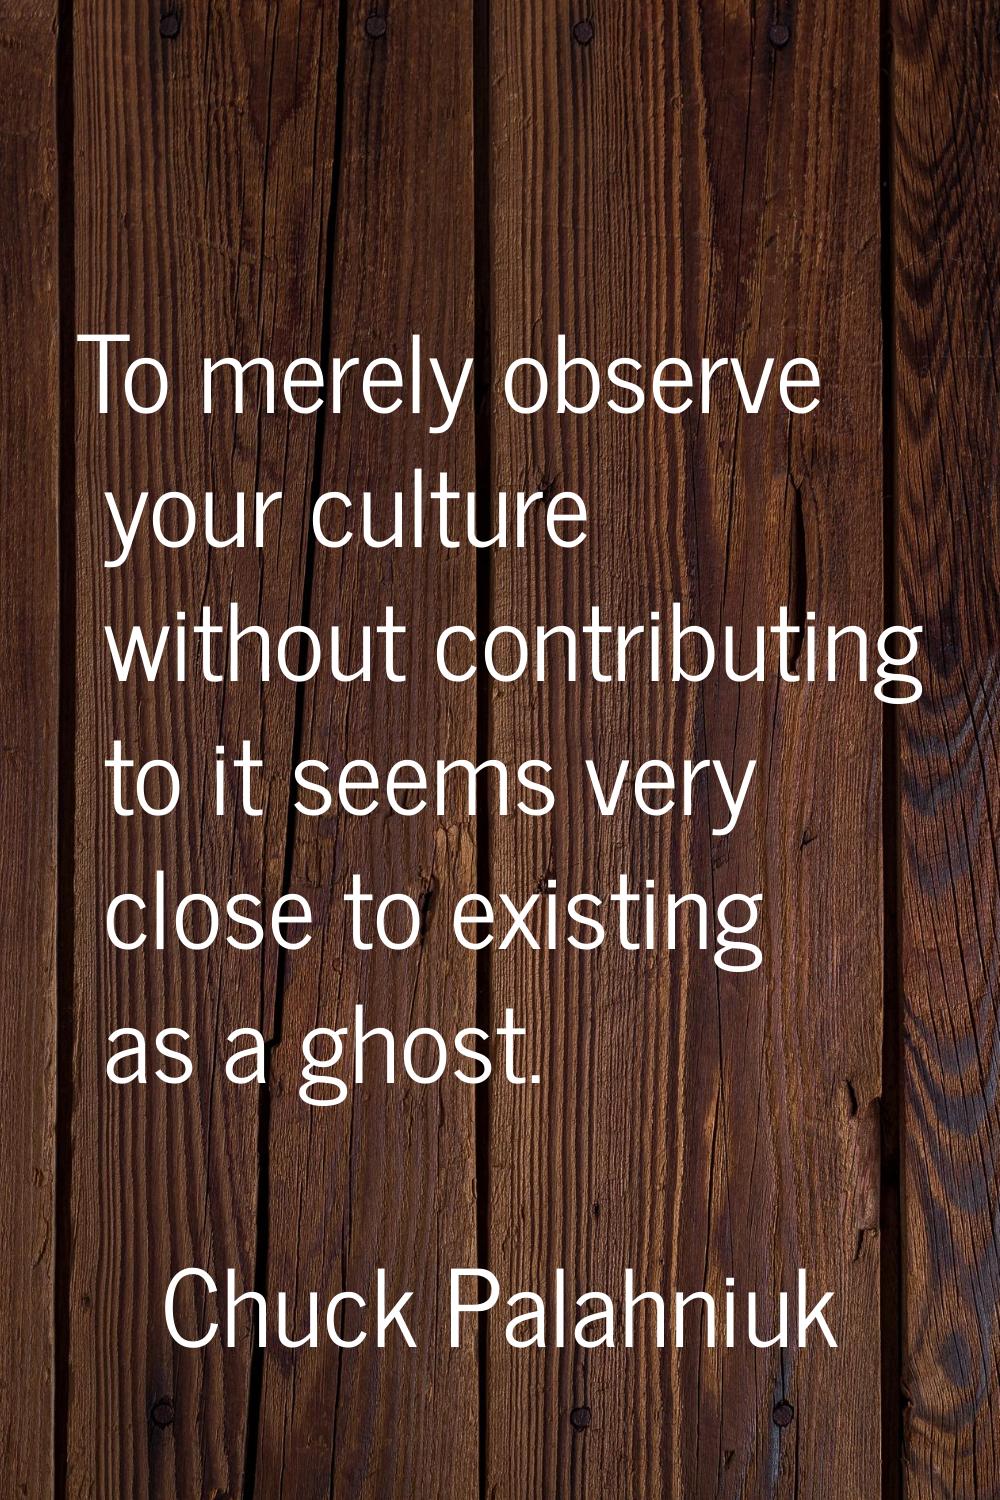 To merely observe your culture without contributing to it seems very close to existing as a ghost.